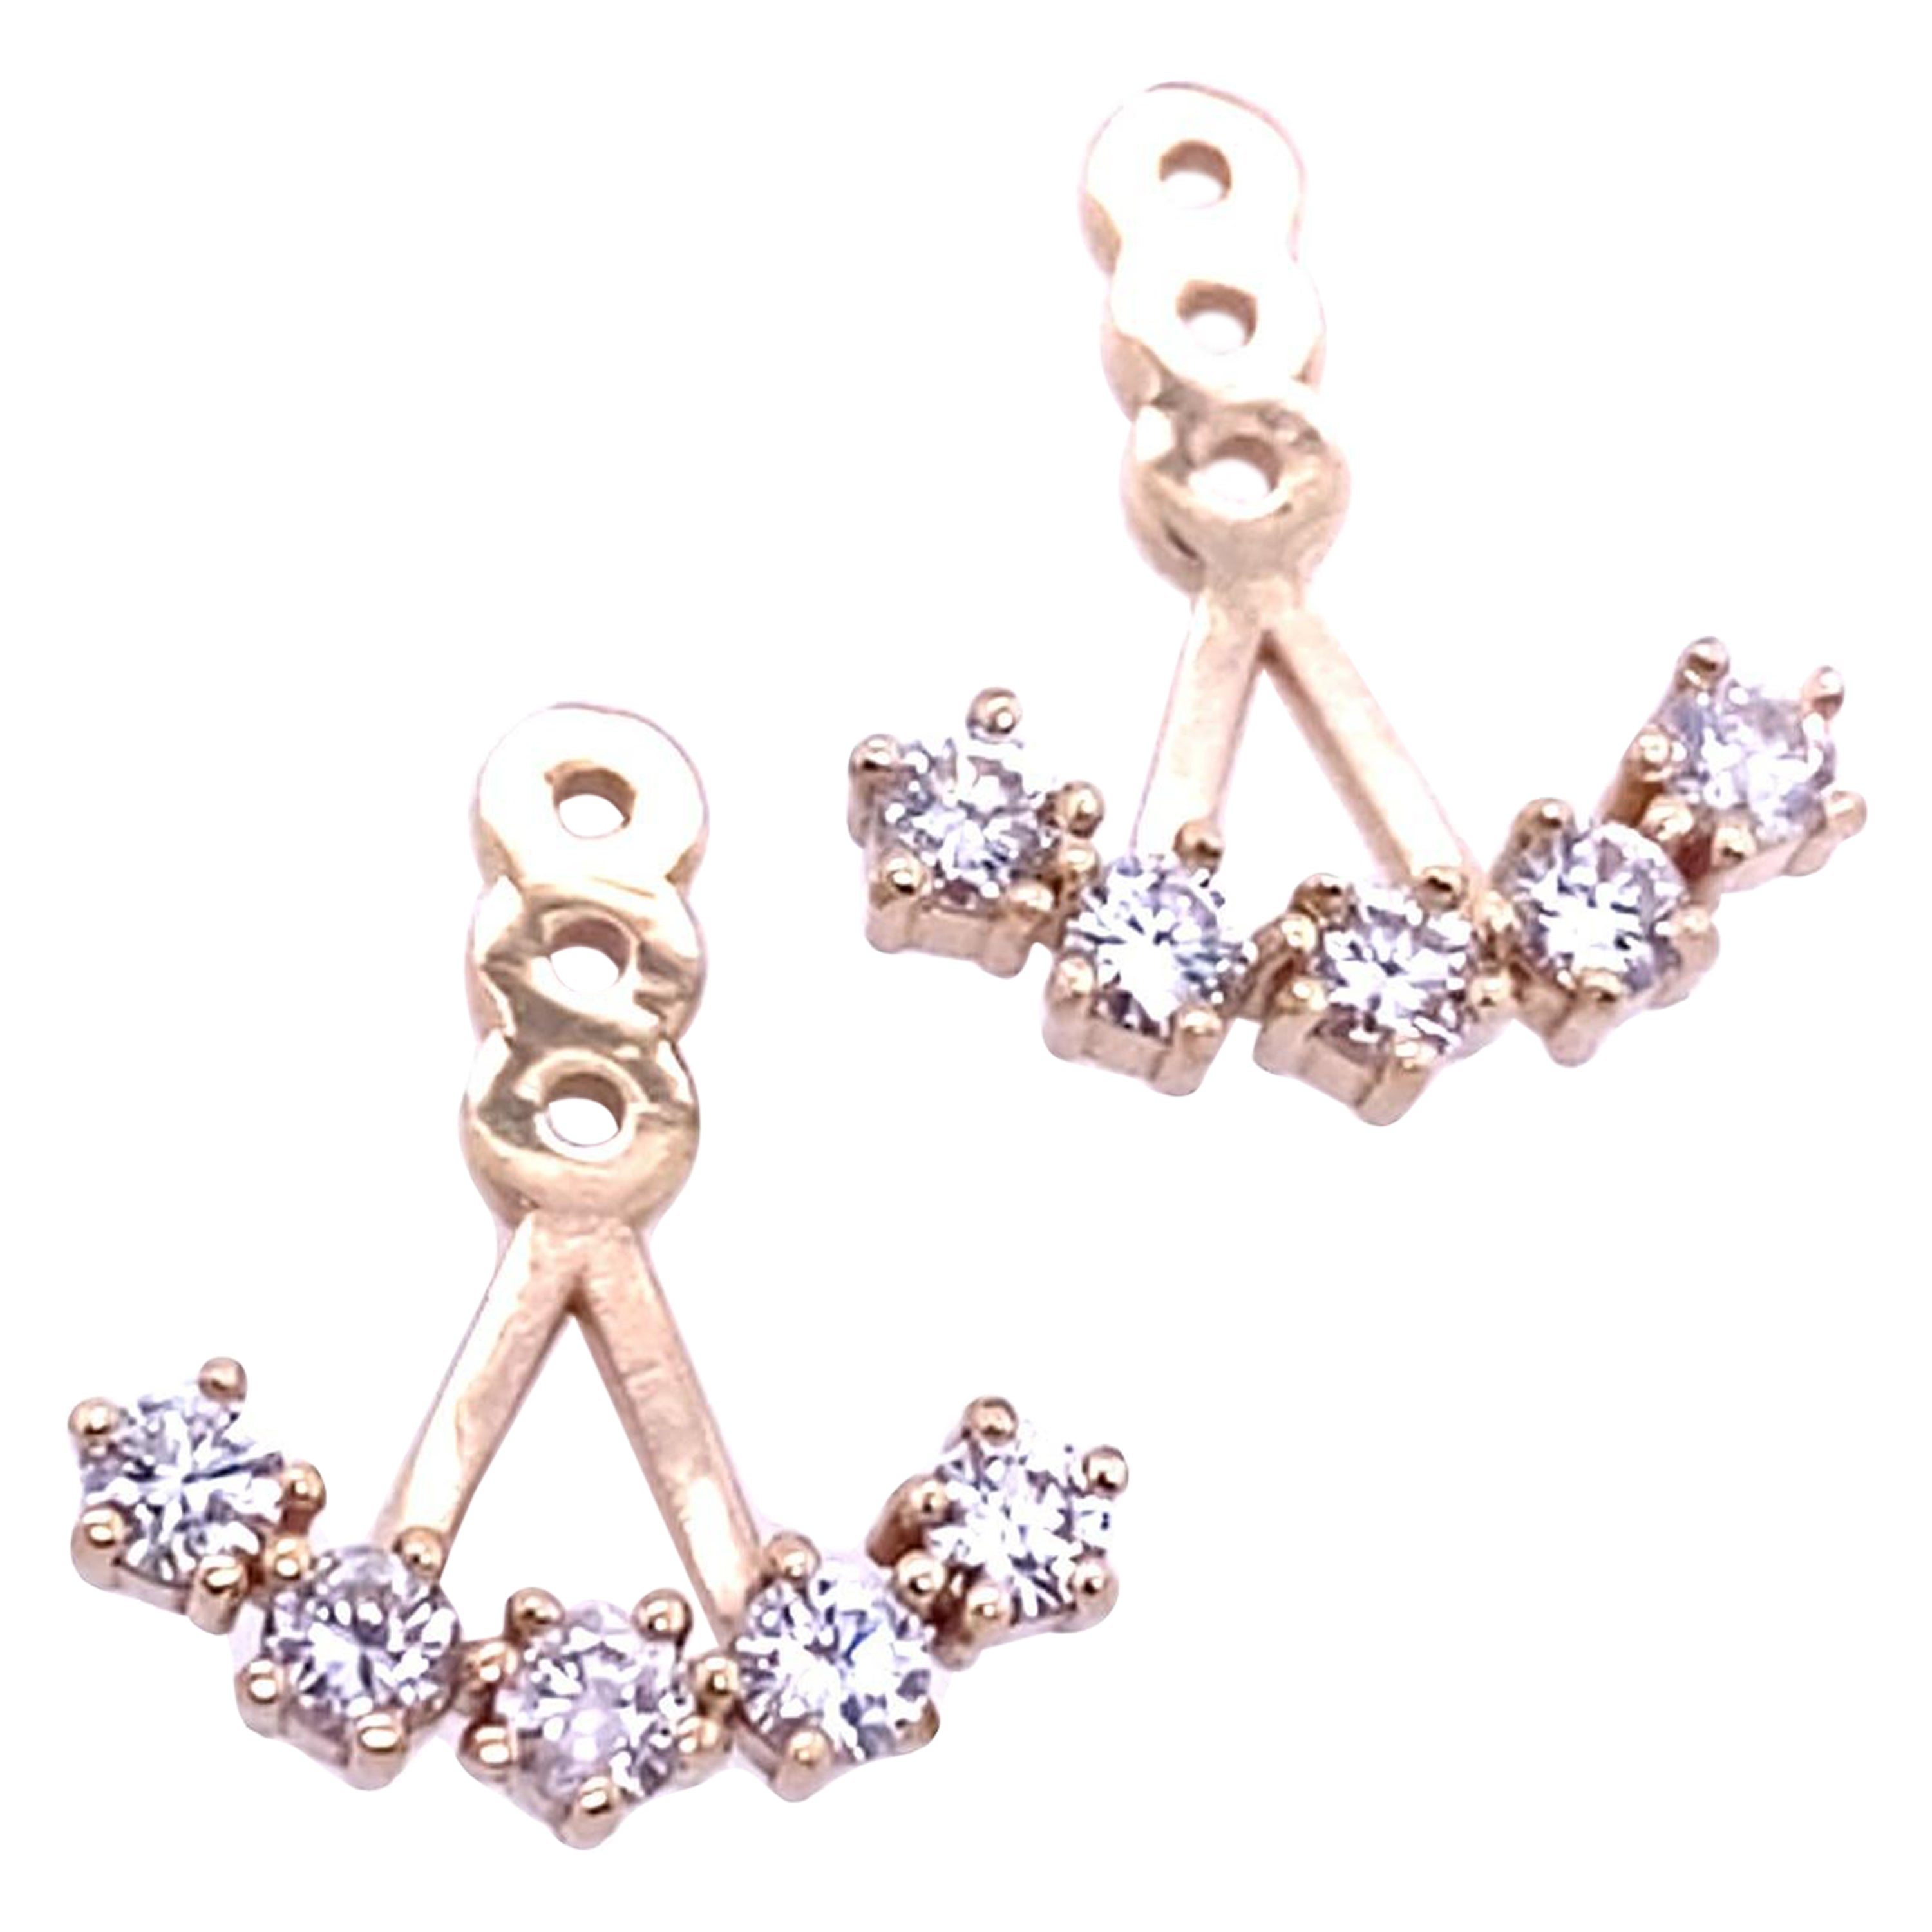 14ct Yellow Gold Earring Jackets fit Behind any Stud Earring, set with 0.40ct